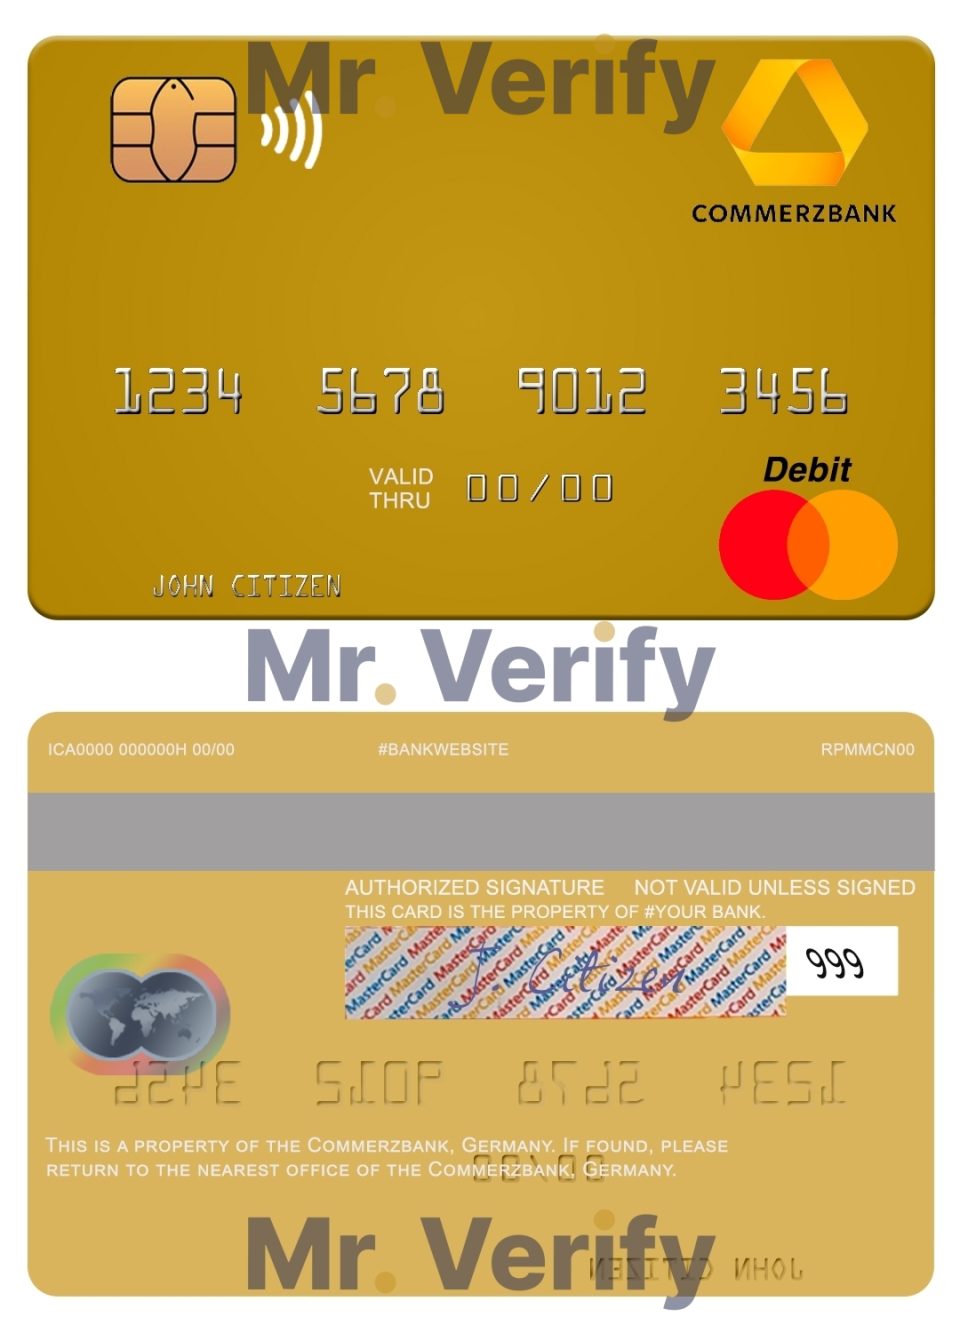 Fillable Germany Commerz Bank mastercard Templates | Layer-Based PSD